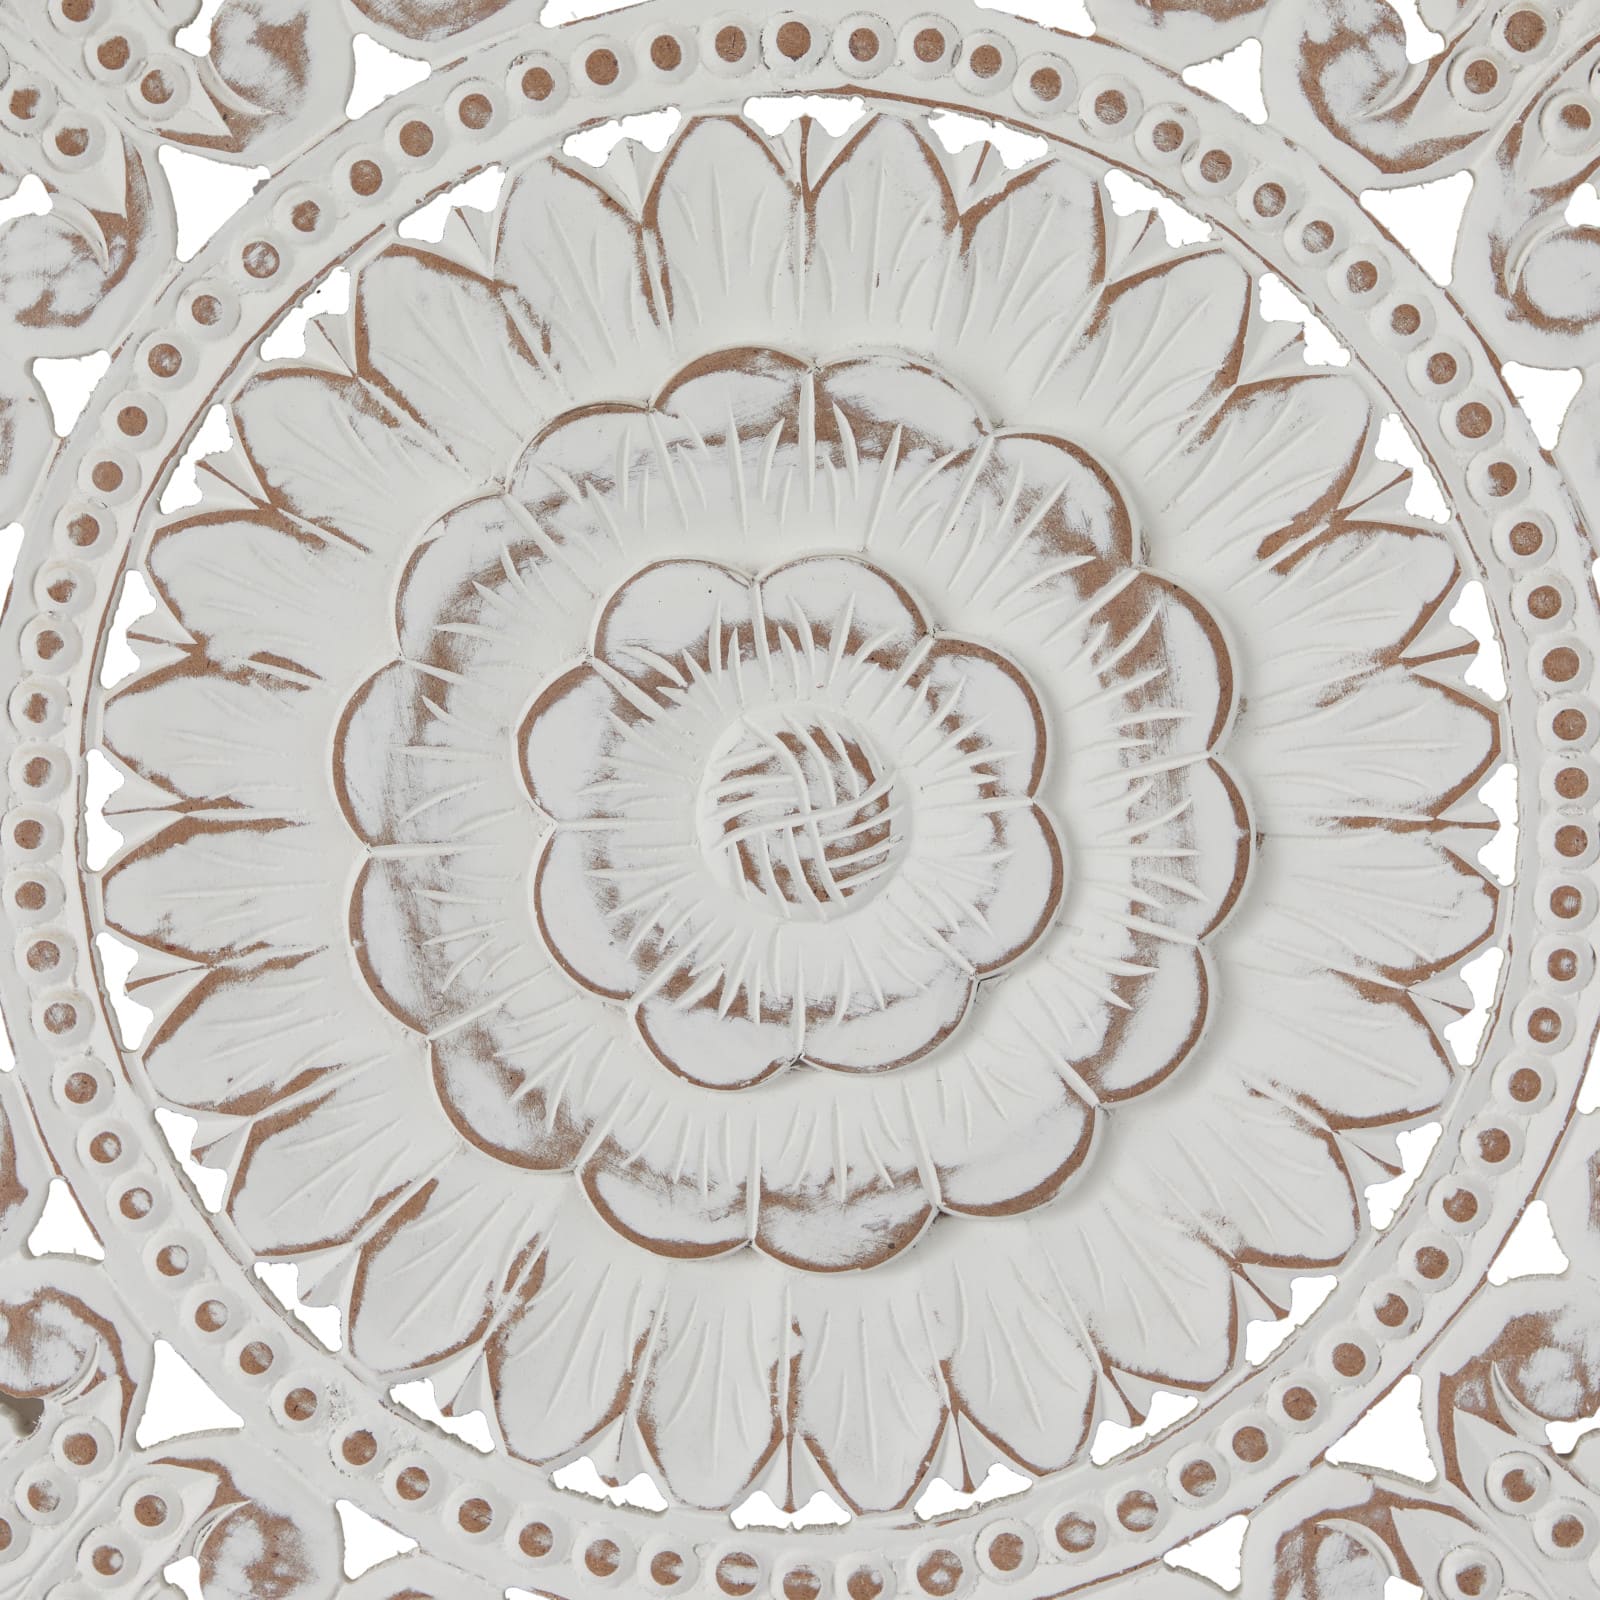 White Wood Handmade Intricately Carved Floral Wall Decor with Mandala Design Set of 3 16&#x22;, 48&#x22;